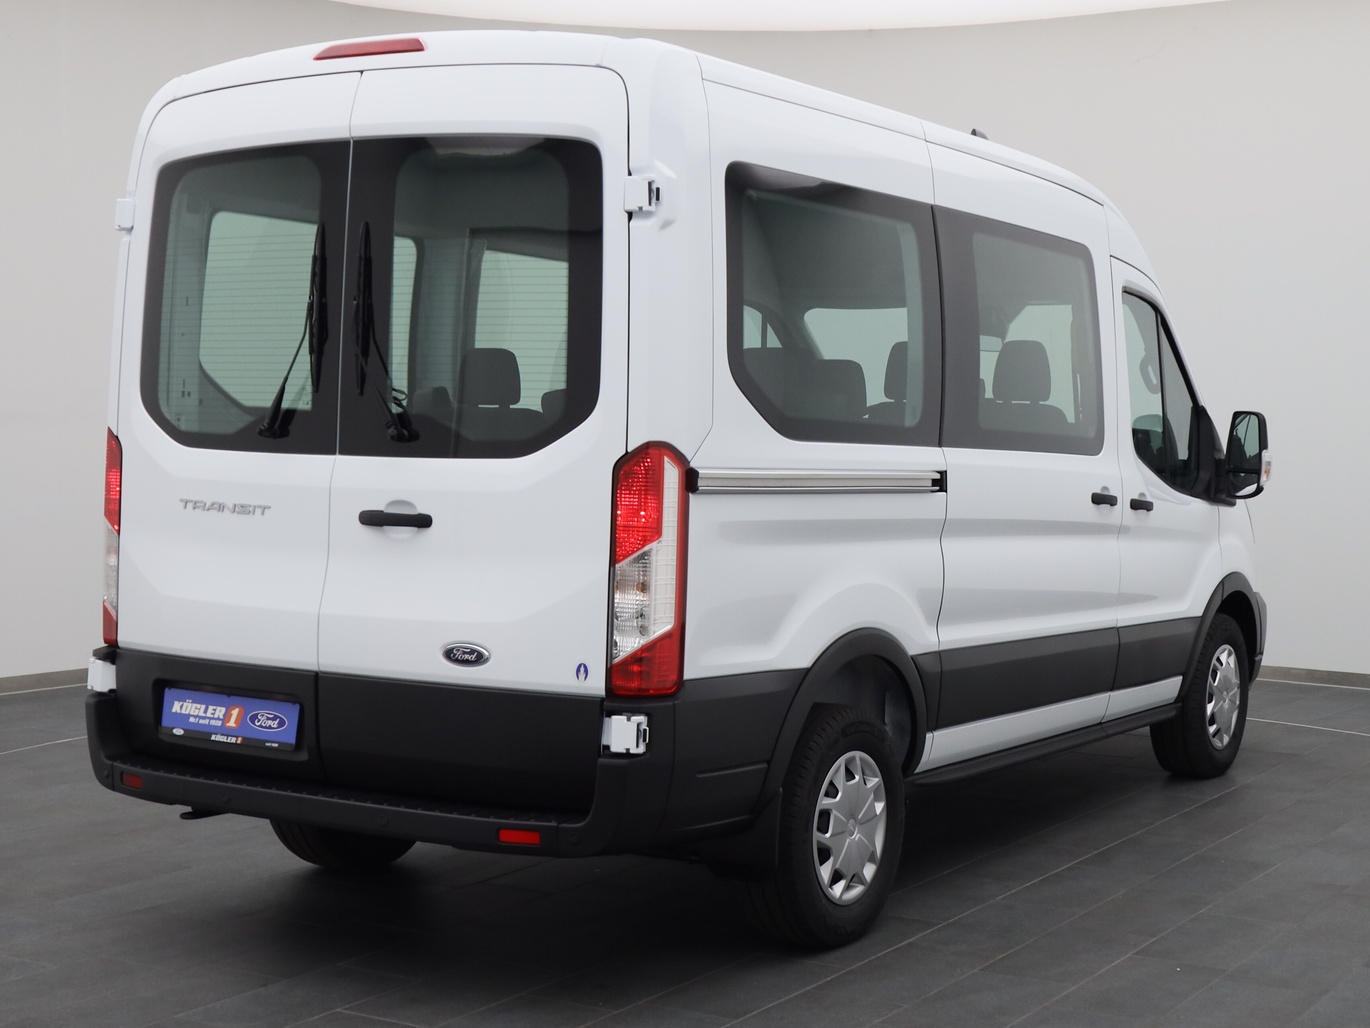  Ford Transit Kombi 350 L2H2 Trend 150PS Aut. in Weiss 